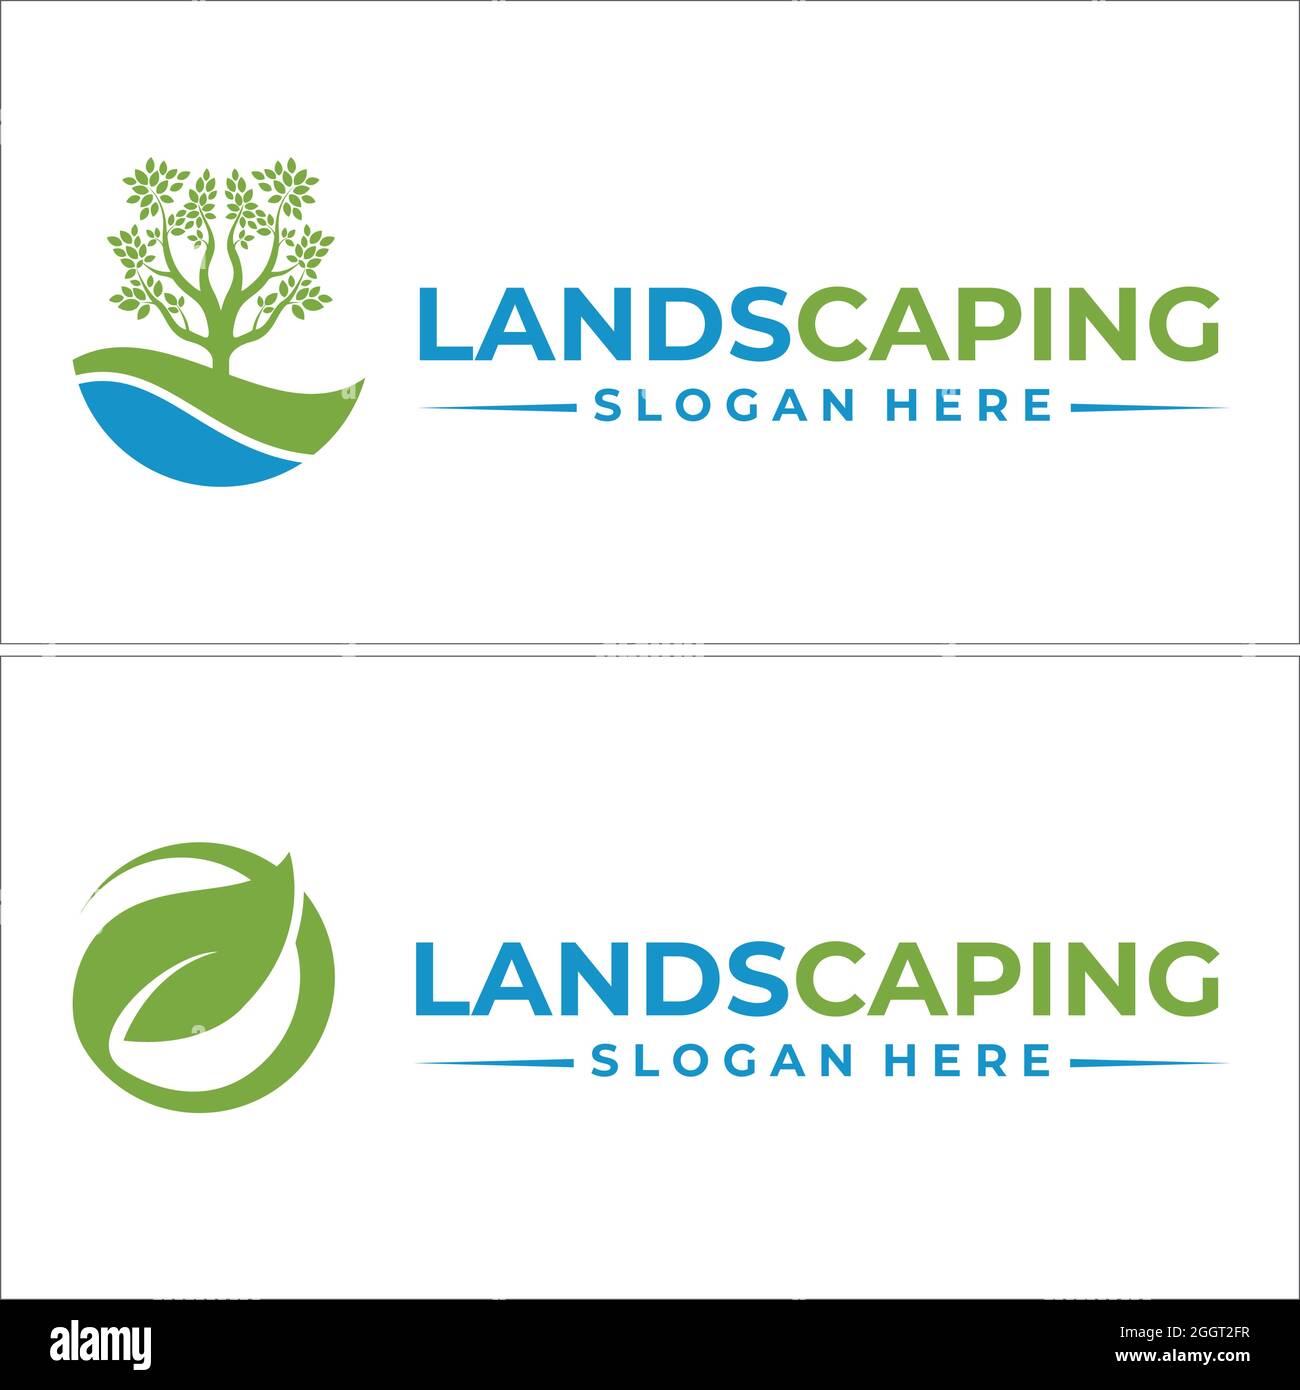 Landscaping farm agriculture nature logo design Stock Vector